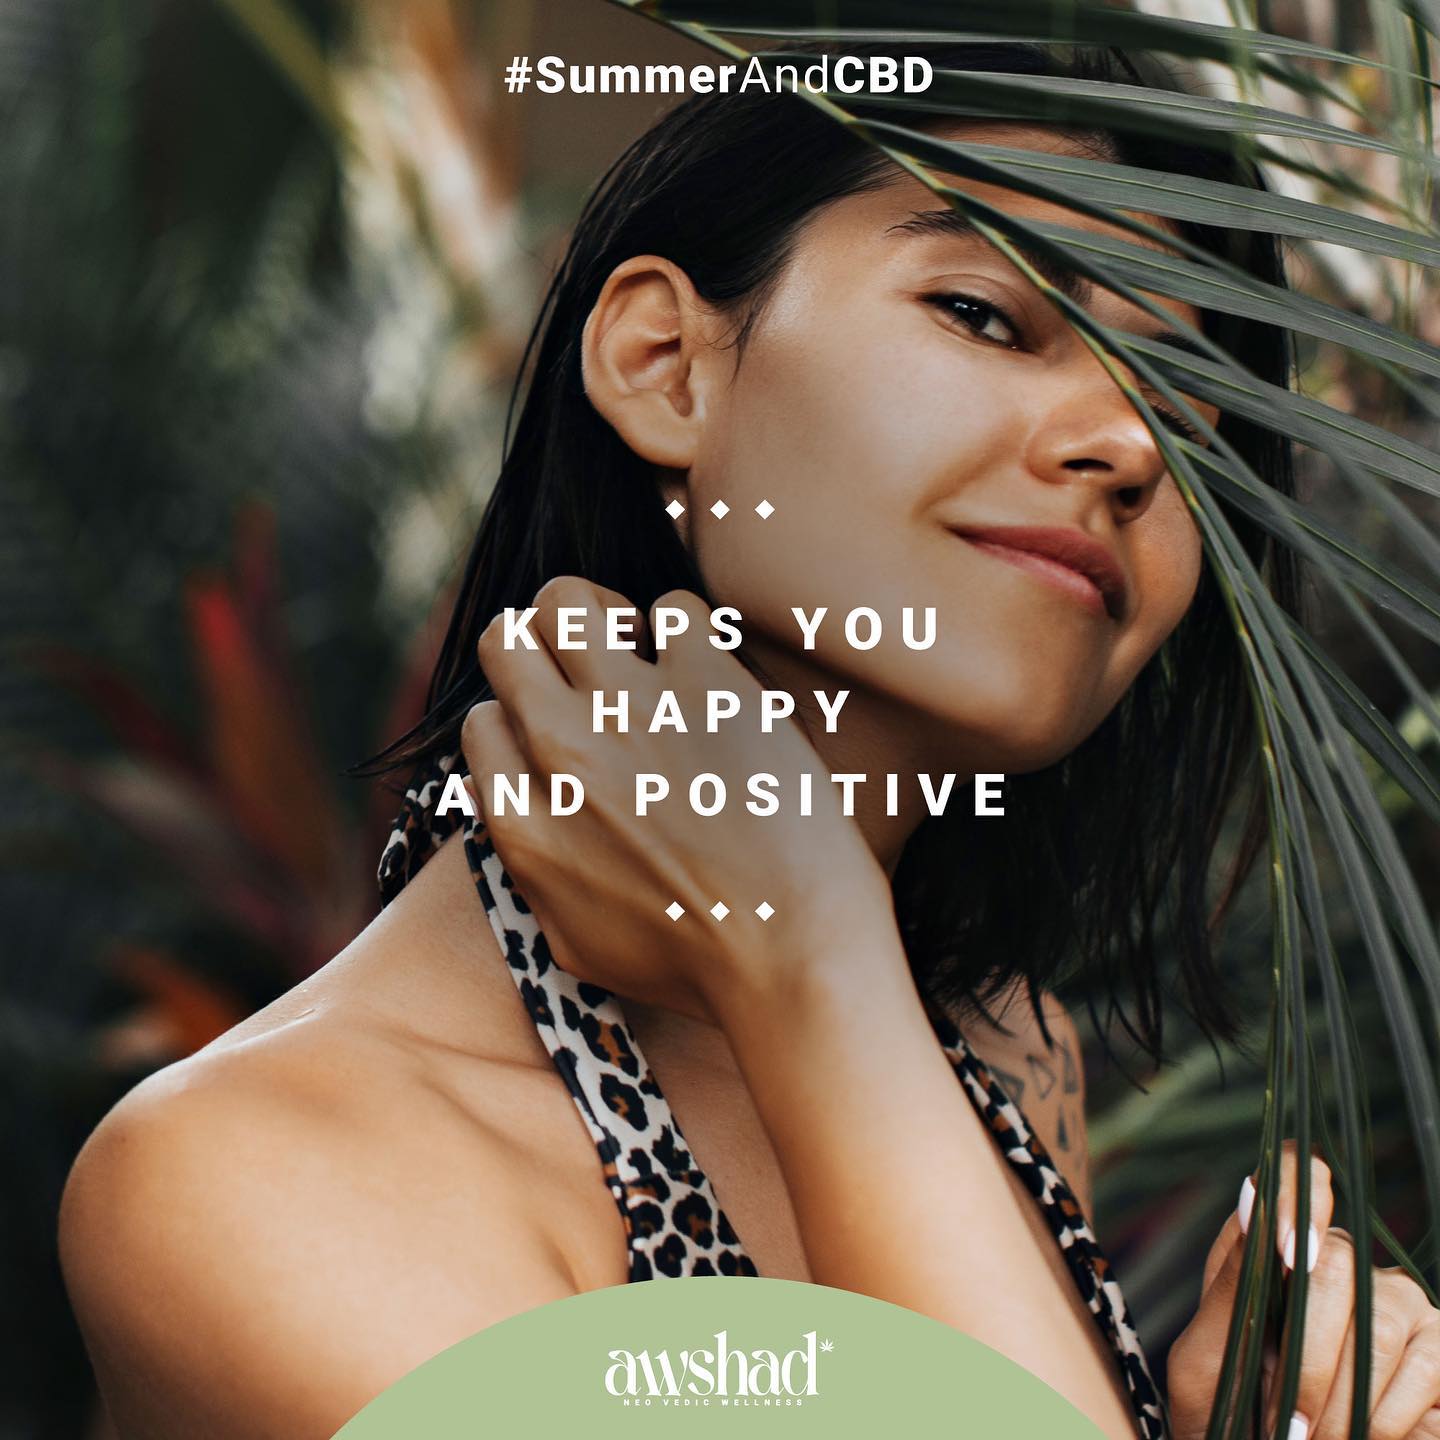 🌞Summer can drain you. The hot loo and sultry weather can often make you lethargic and dull.

🌞The interaction between CBD and ECS in the body can help you stay in the right headspace and even encourages you to stay active.

🌞Get yourself our Full Spectrum Oil if you’re feeling gloomy and lazy. Shop on www.awshad.com today.

​.
.

#allnatural #hempbenefits #tincture #wellness #mondaymotivation #summervibes #vijayaoil #hempextract #hempproducts #sunburn #health #healthandwellness #healthy #hempextractoil #heal #natural #naturalremedy #happiness #care #love #active #shoplocal #ayurveda #skin #summer 
 
​

​